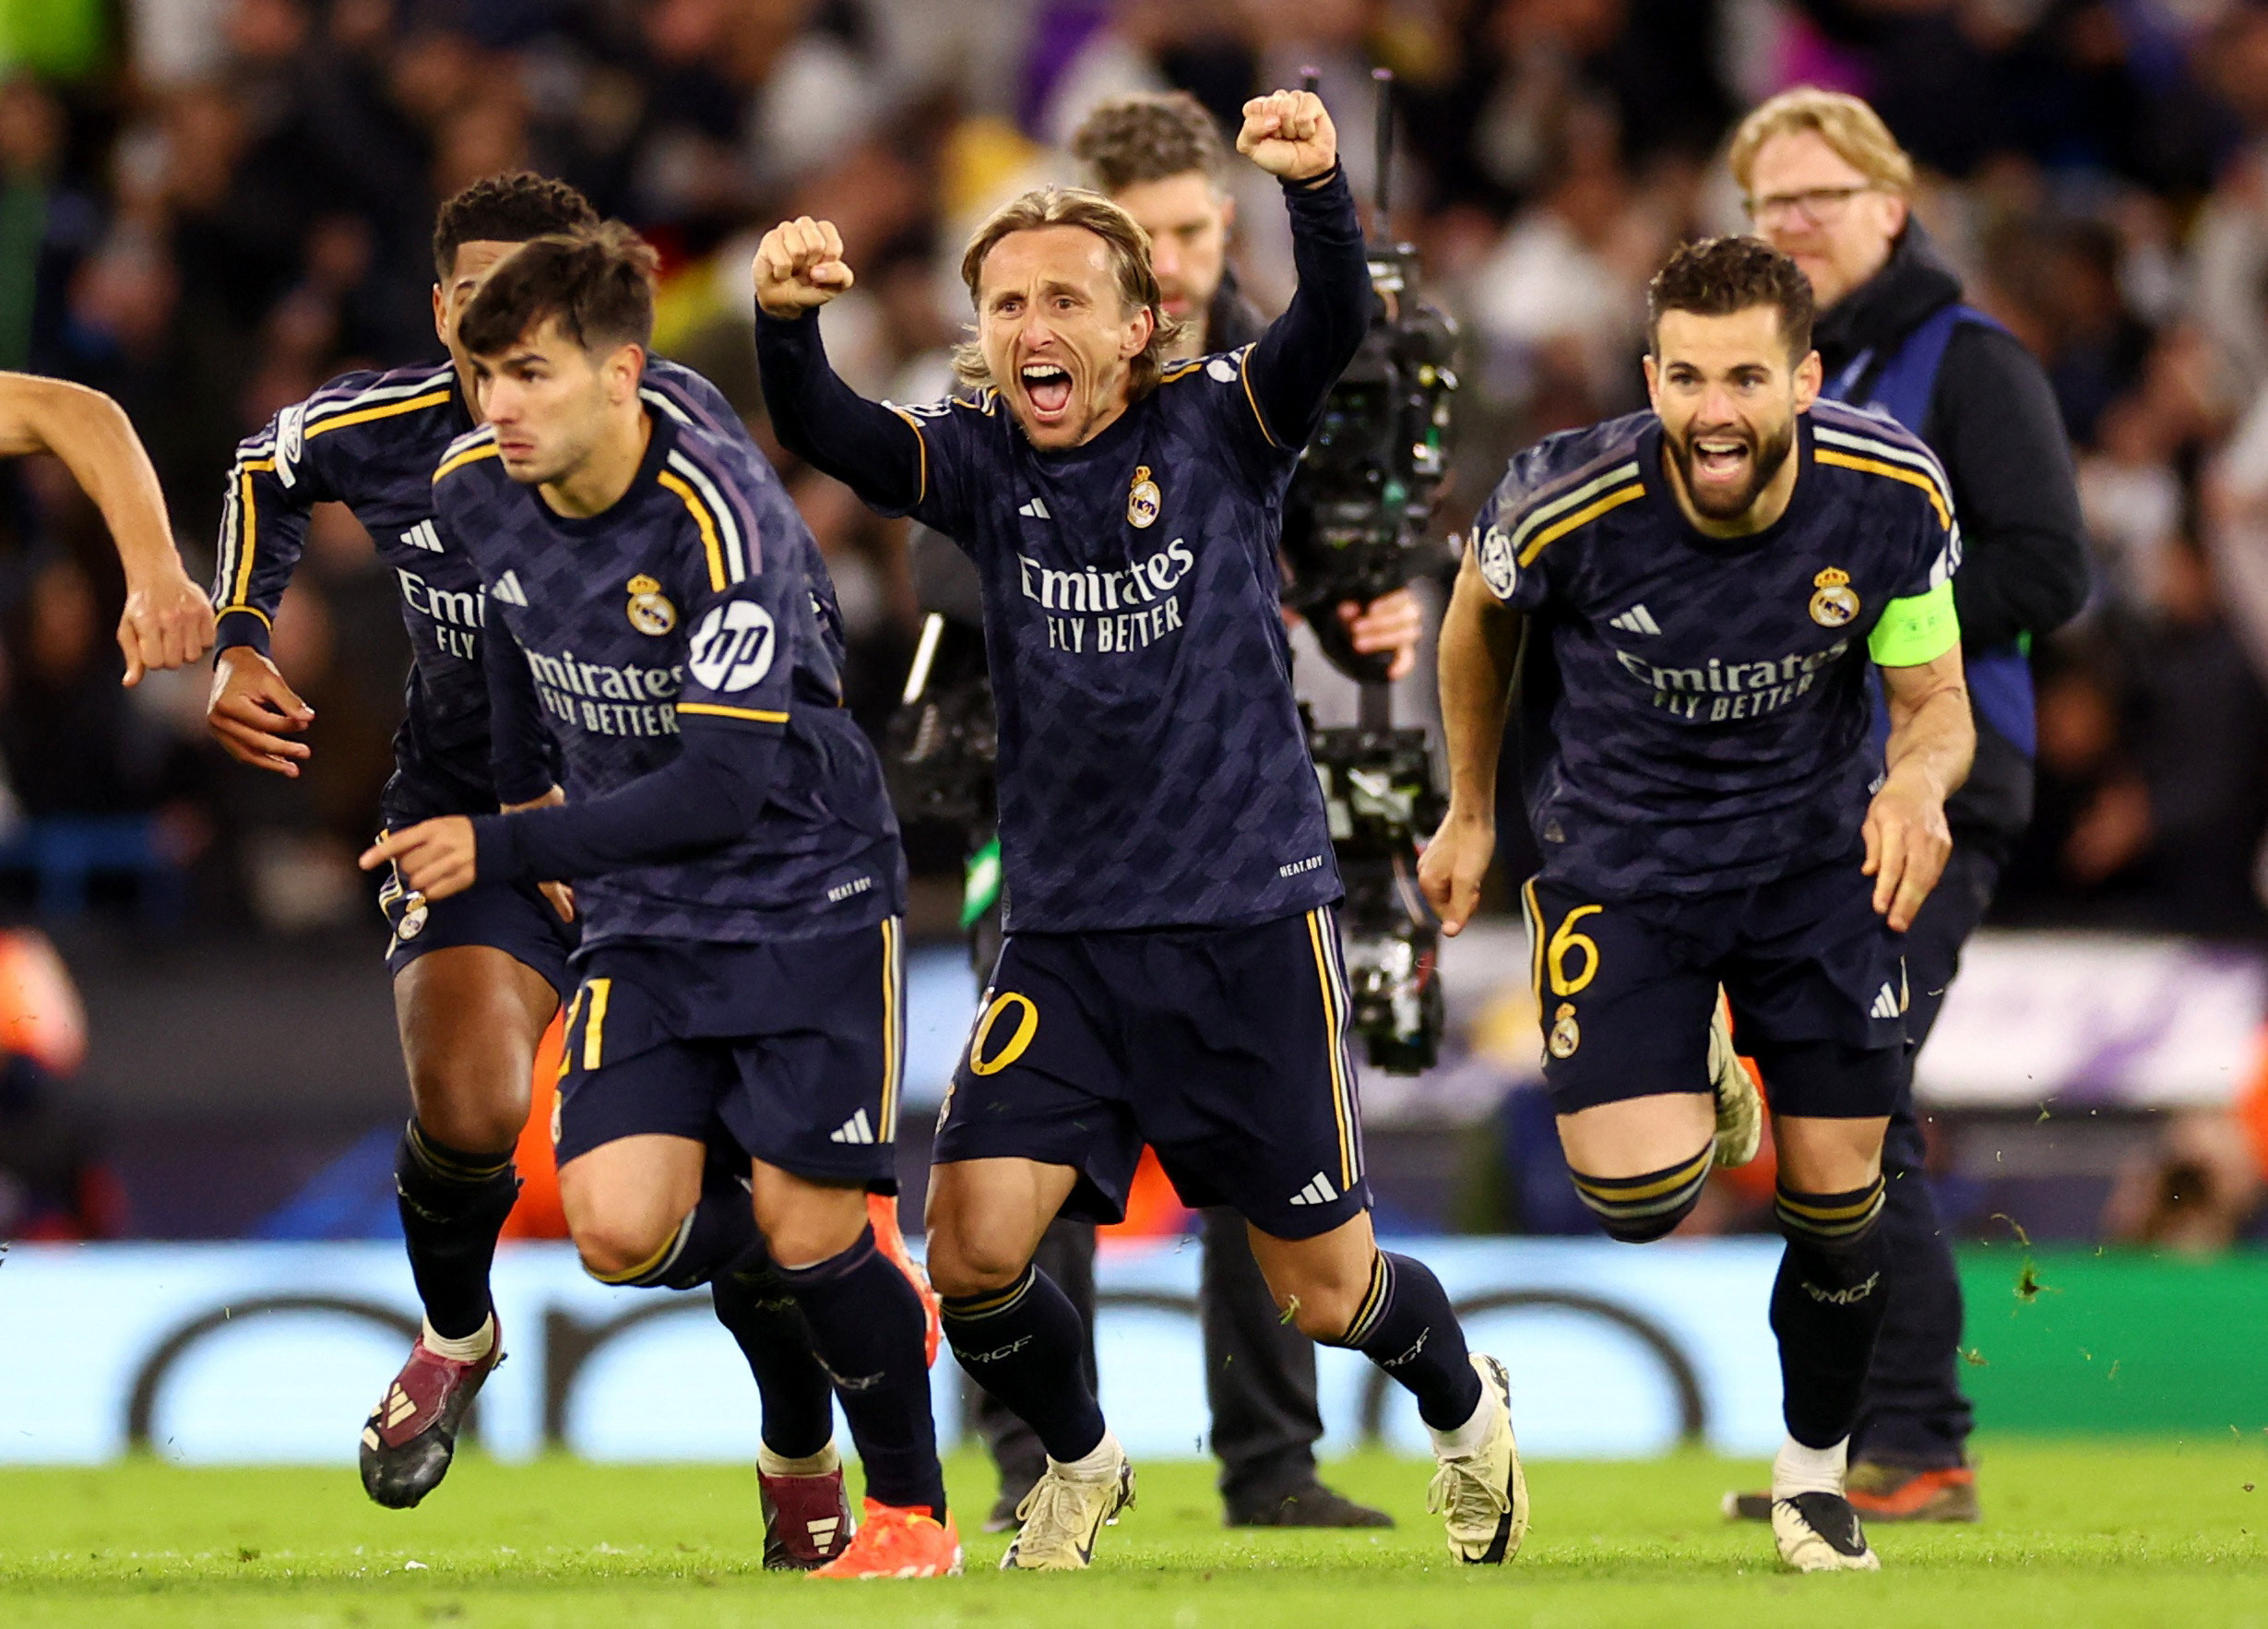 sweet victory real madrid s luka modric and teammates celebrate winning the penalty shootout against manchester city fc during the uefa champions league quarterfinal second leg at etihad stadium photo reuters